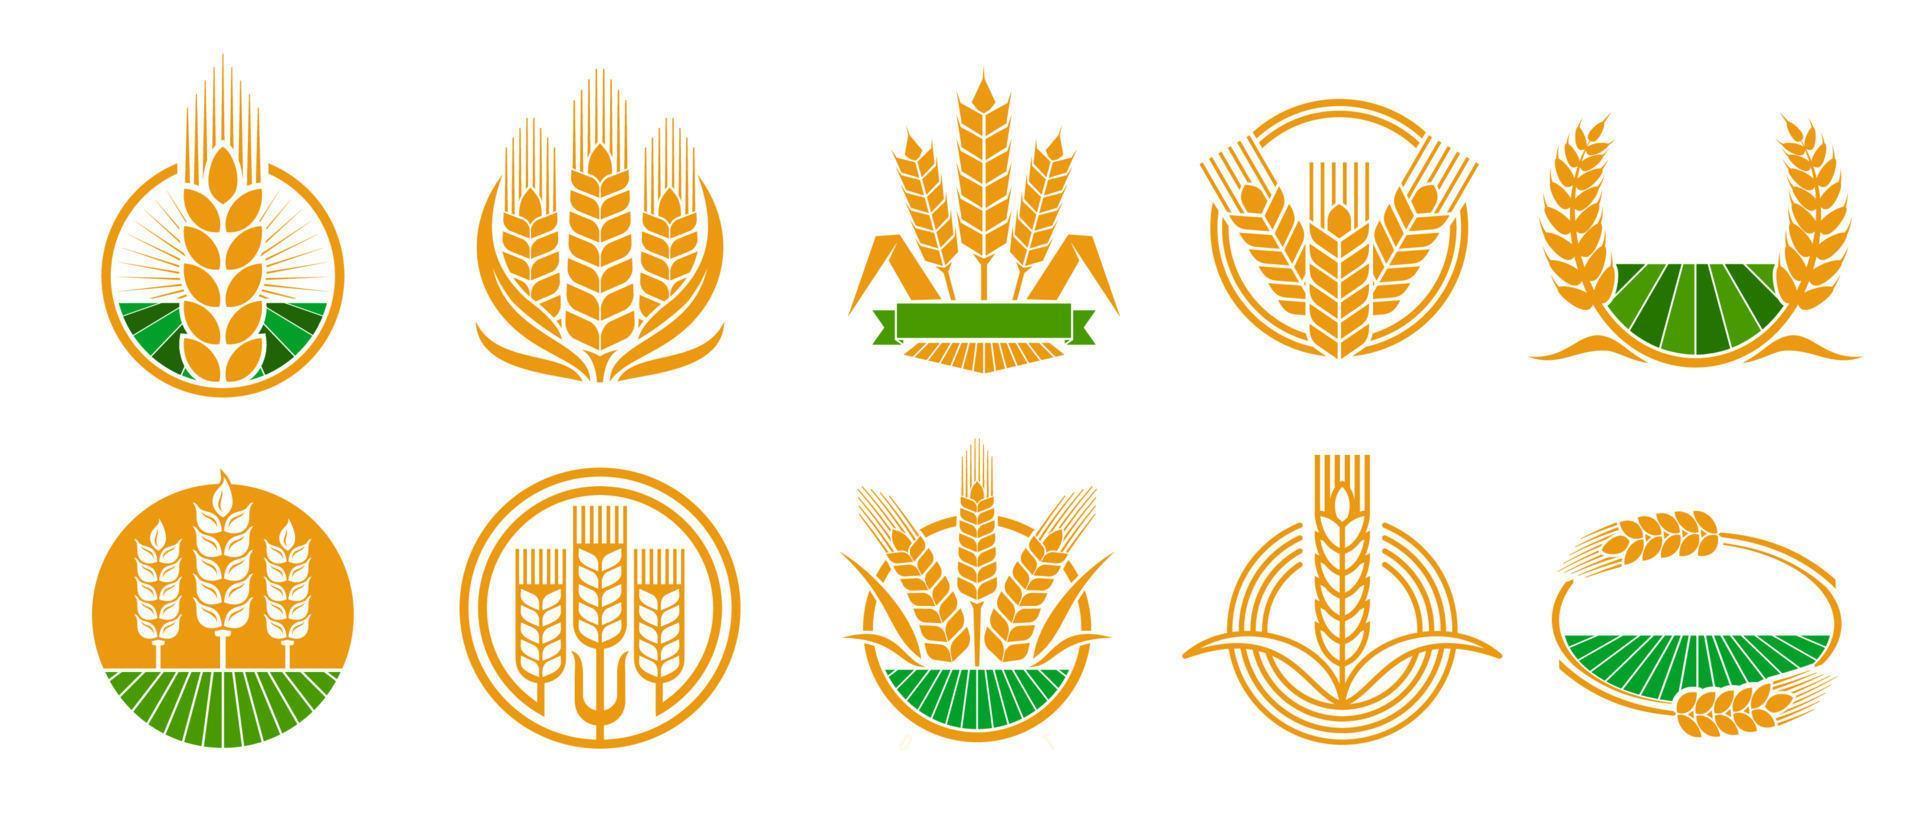 Cereal ear spike icons, wheat, rye barley or rice vector